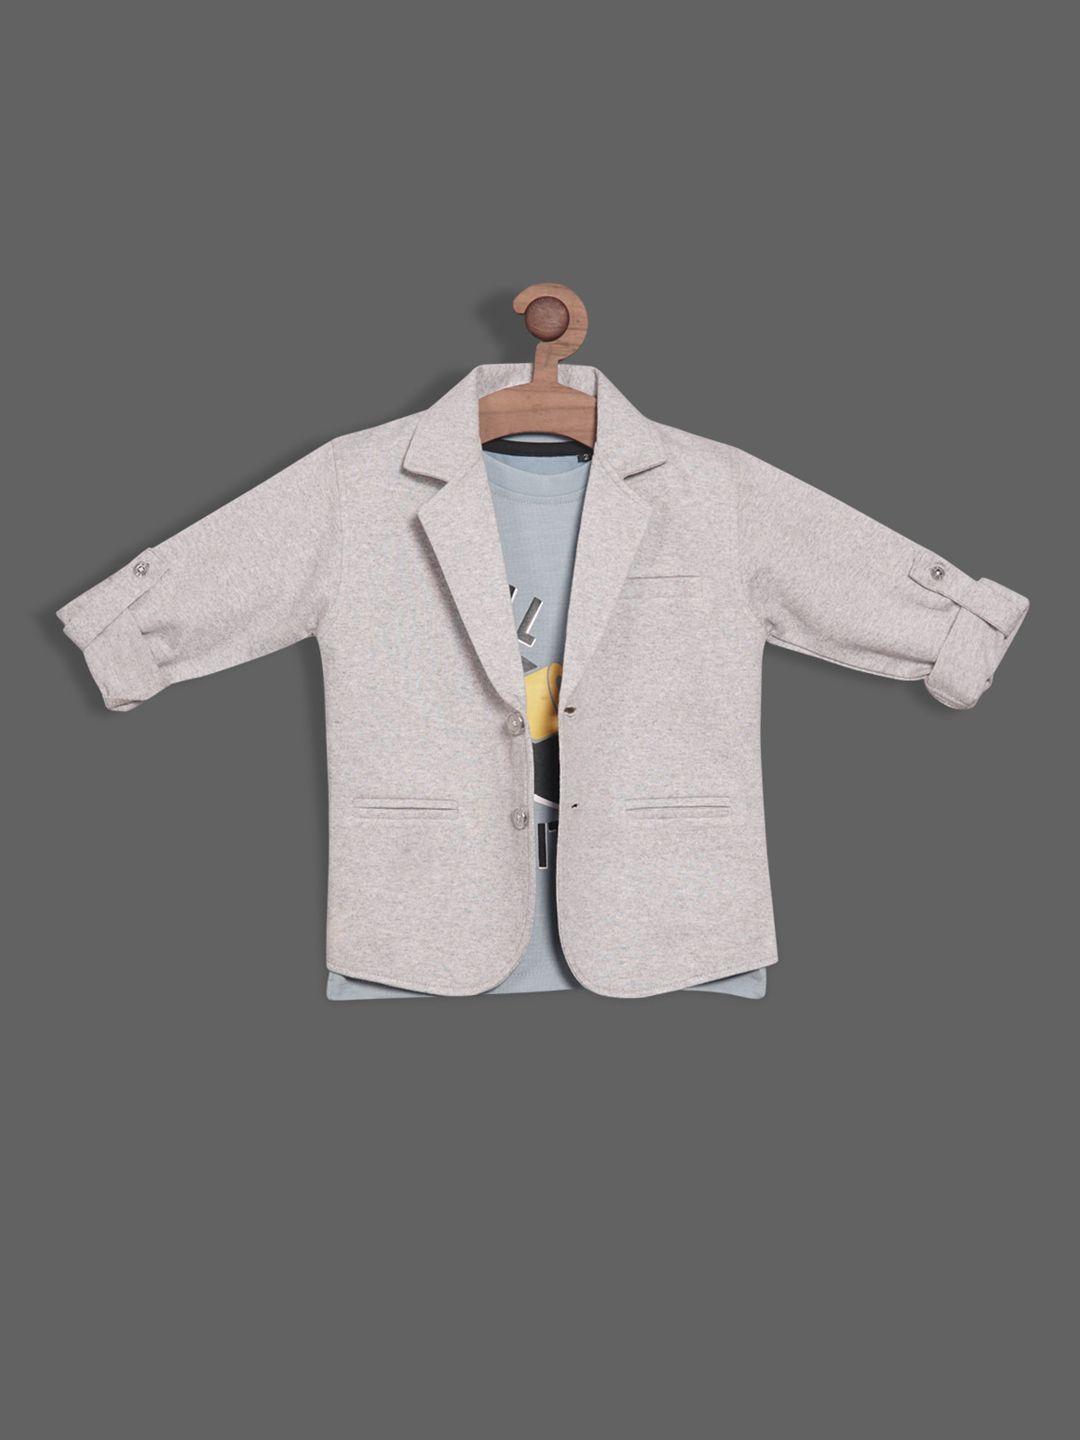 rikidoos-boys-single-breasted-cotton-light-weight-blazer-with-printed-t-shirt